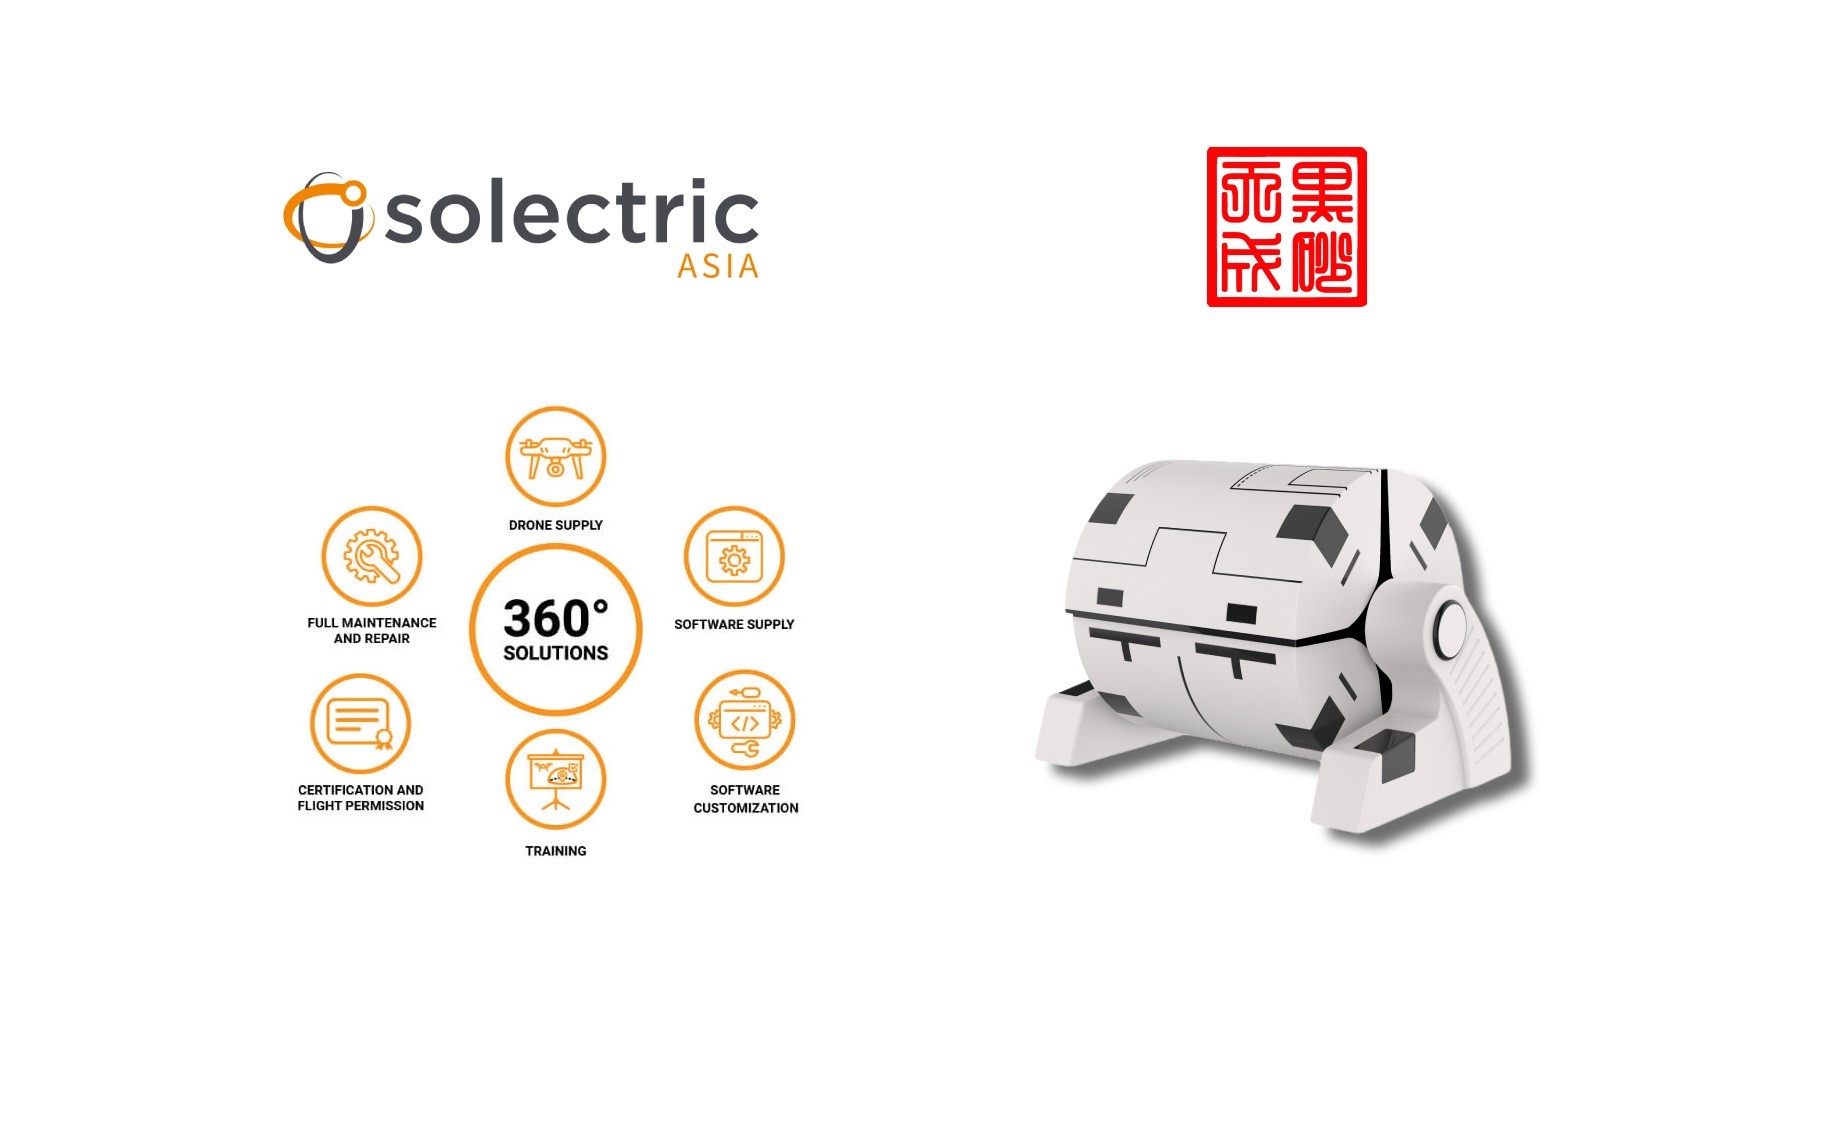 Solectric Asia has joined our autonomous drone program and got the HEISHA exclusive distributor in Thailand 